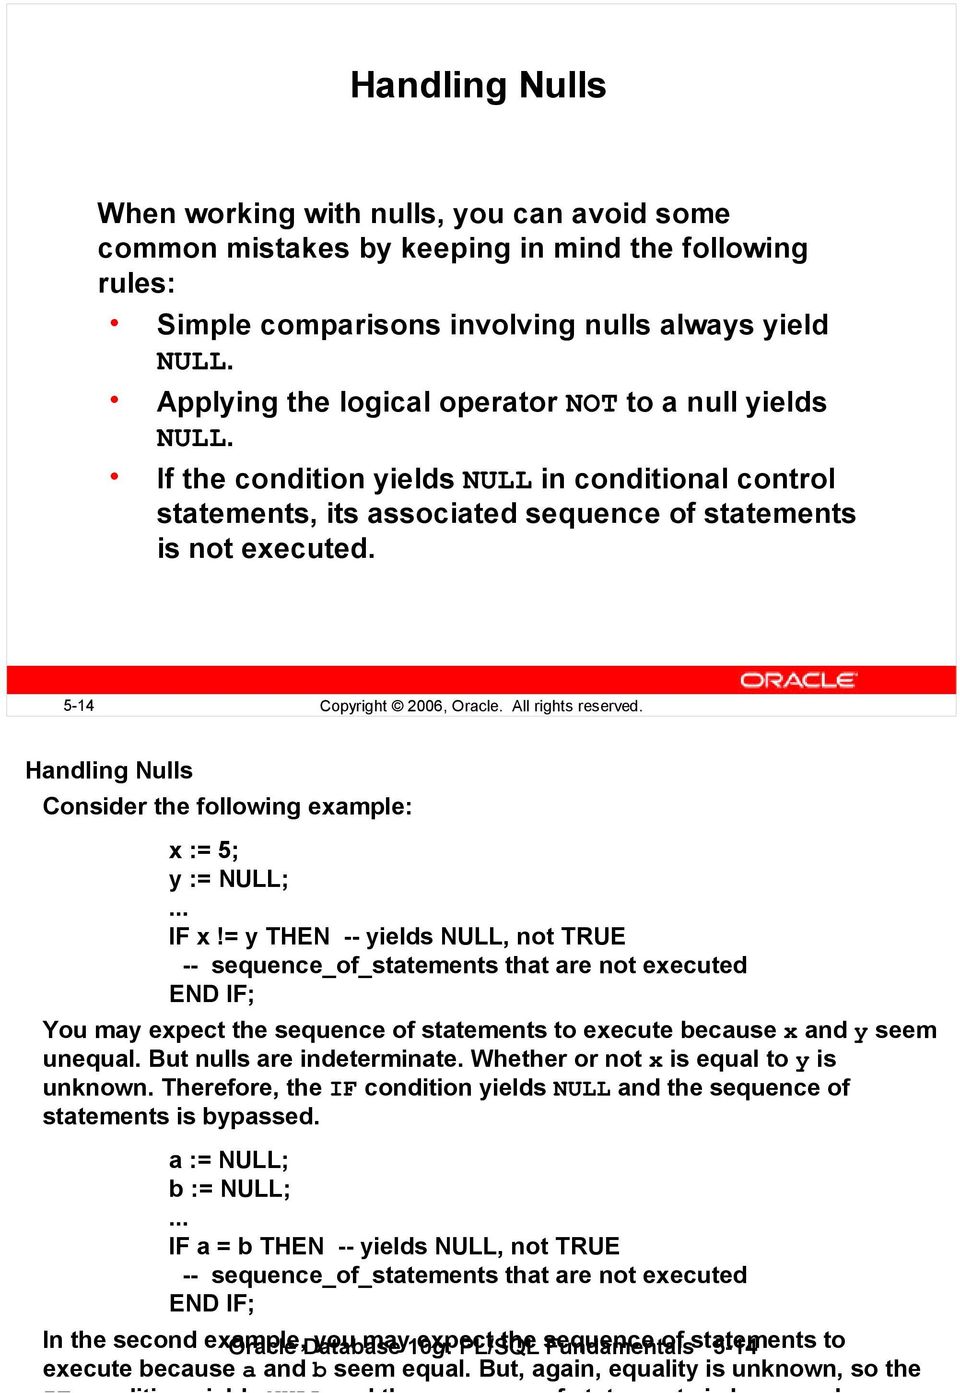 5-14 Copyright 2006, Oracle. All rights reserved. Handling Nulls Consider the following example: x := 5; y := NULL;... IF x!